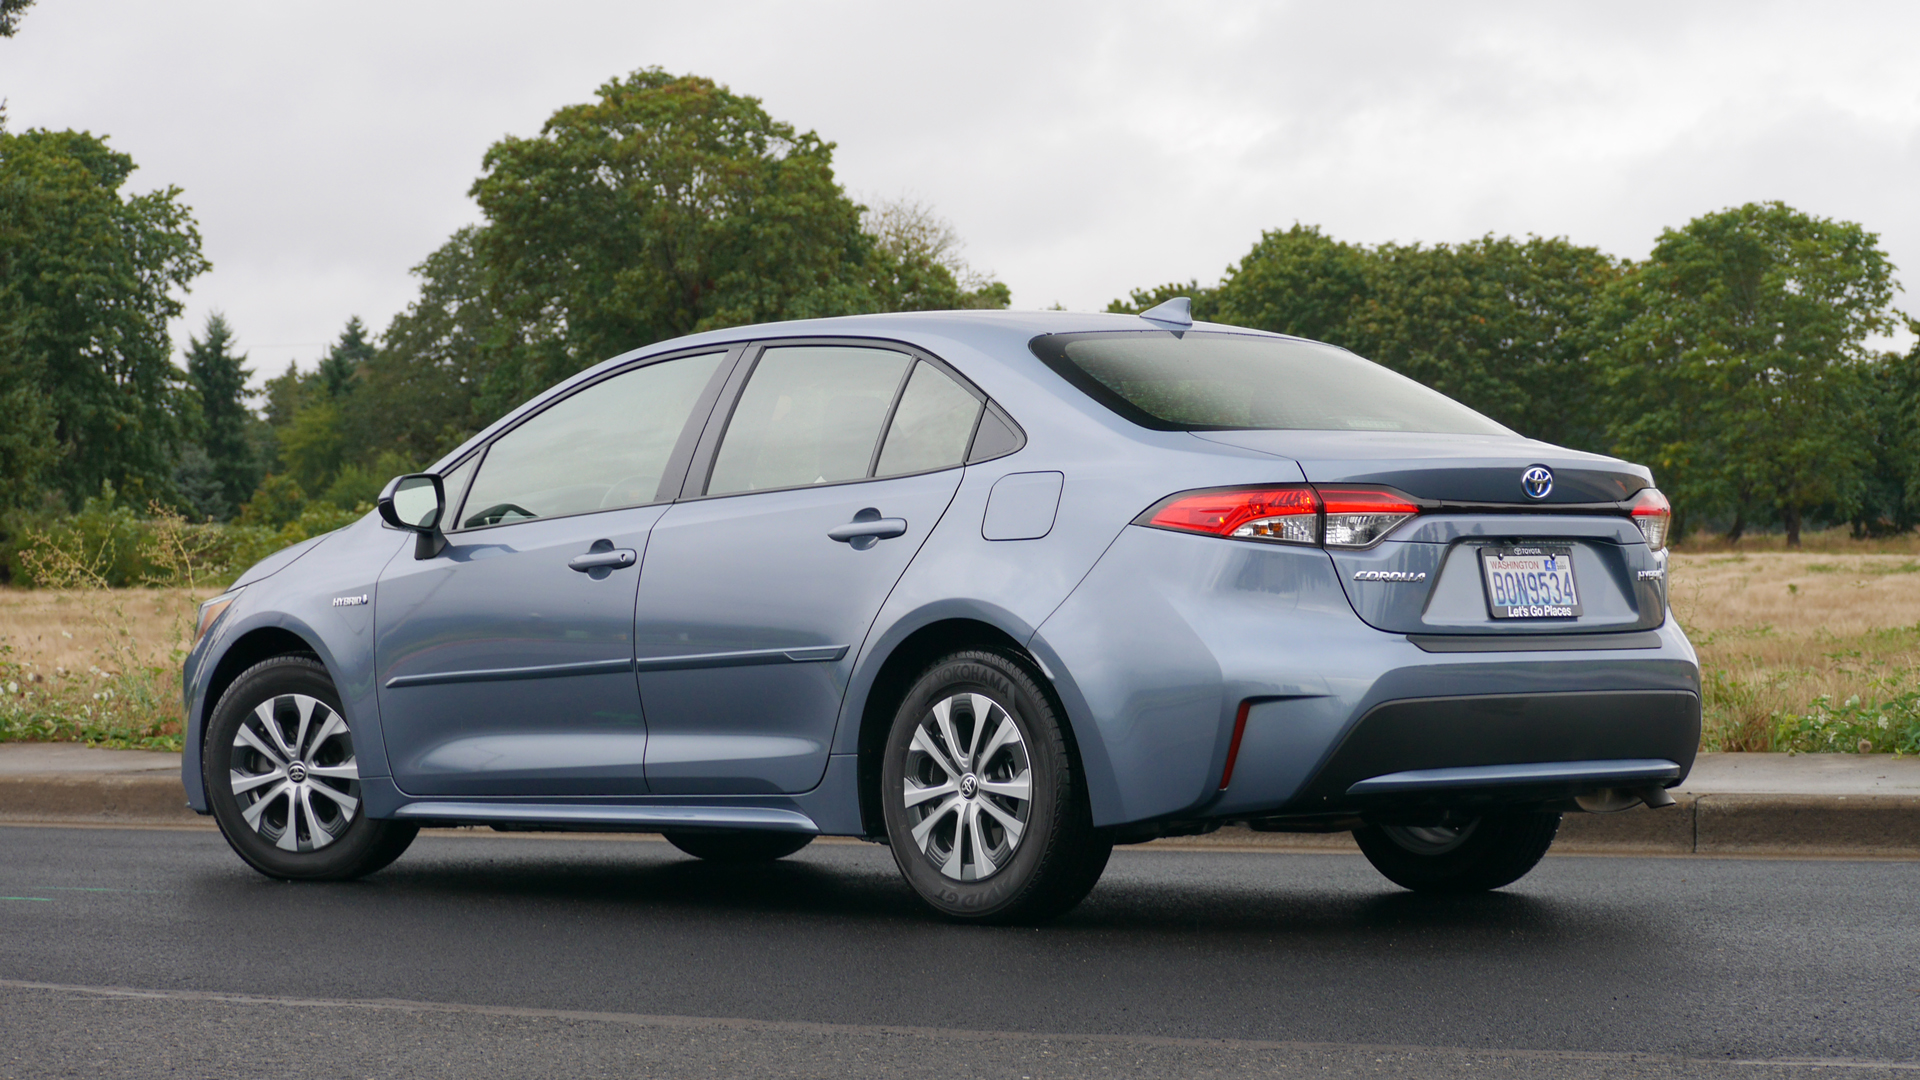 2021 Toyota Corolla Review | What's new, prices, sedan vs hatchback ...